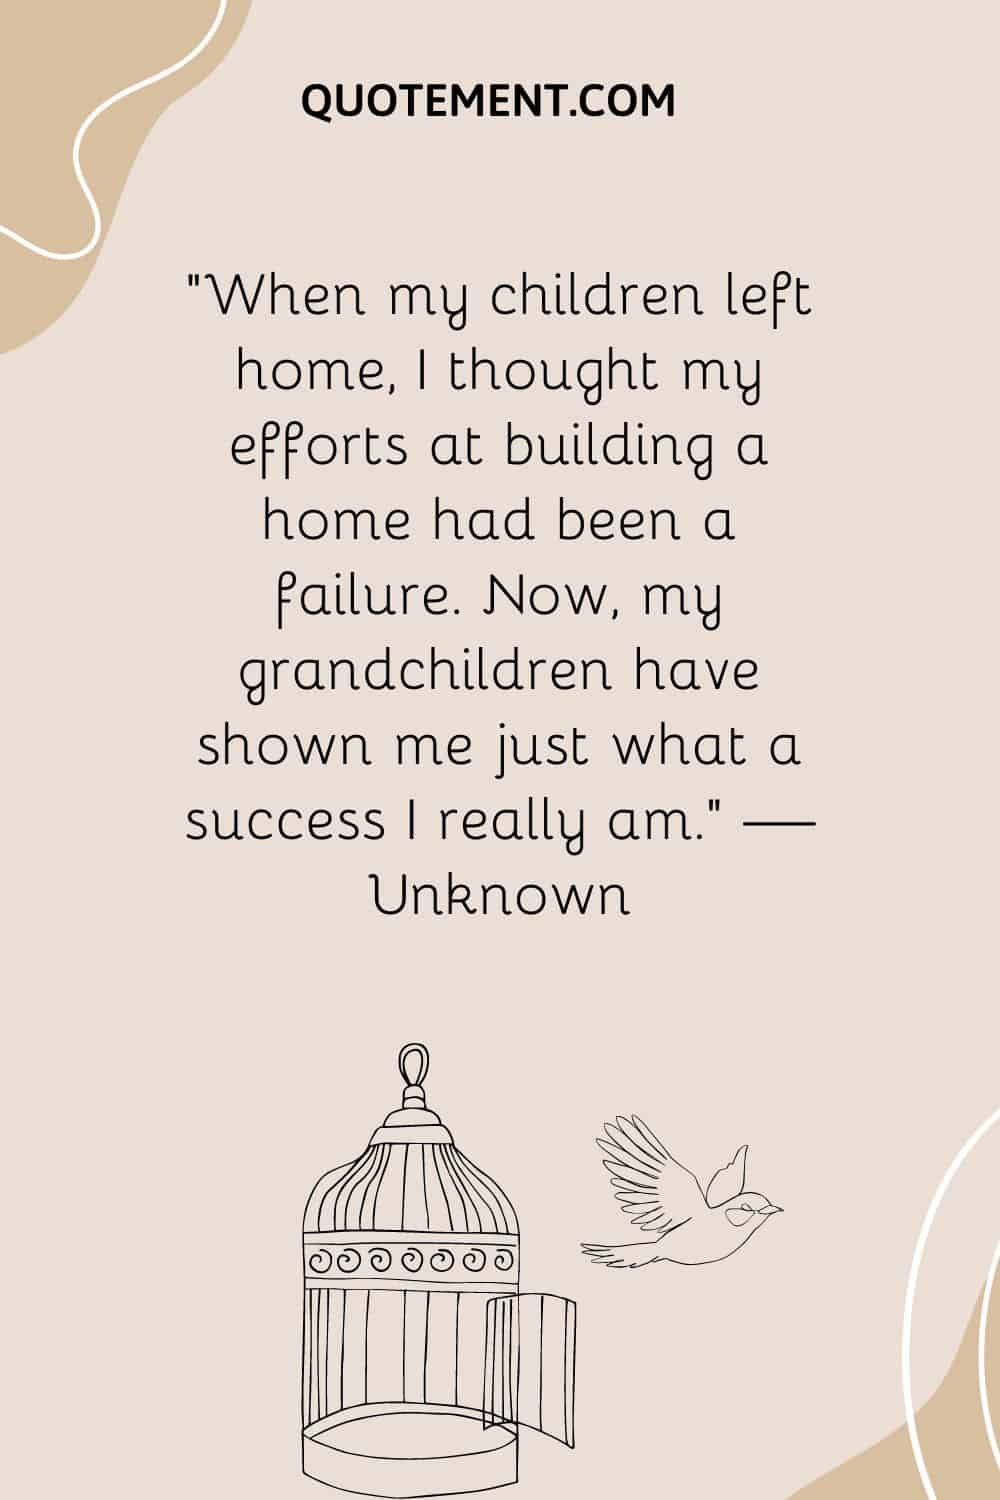 “When my children left home, I thought my efforts at building a home had been a failure. Now, my grandchildren have shown me just what a success I really am.” — Unknown